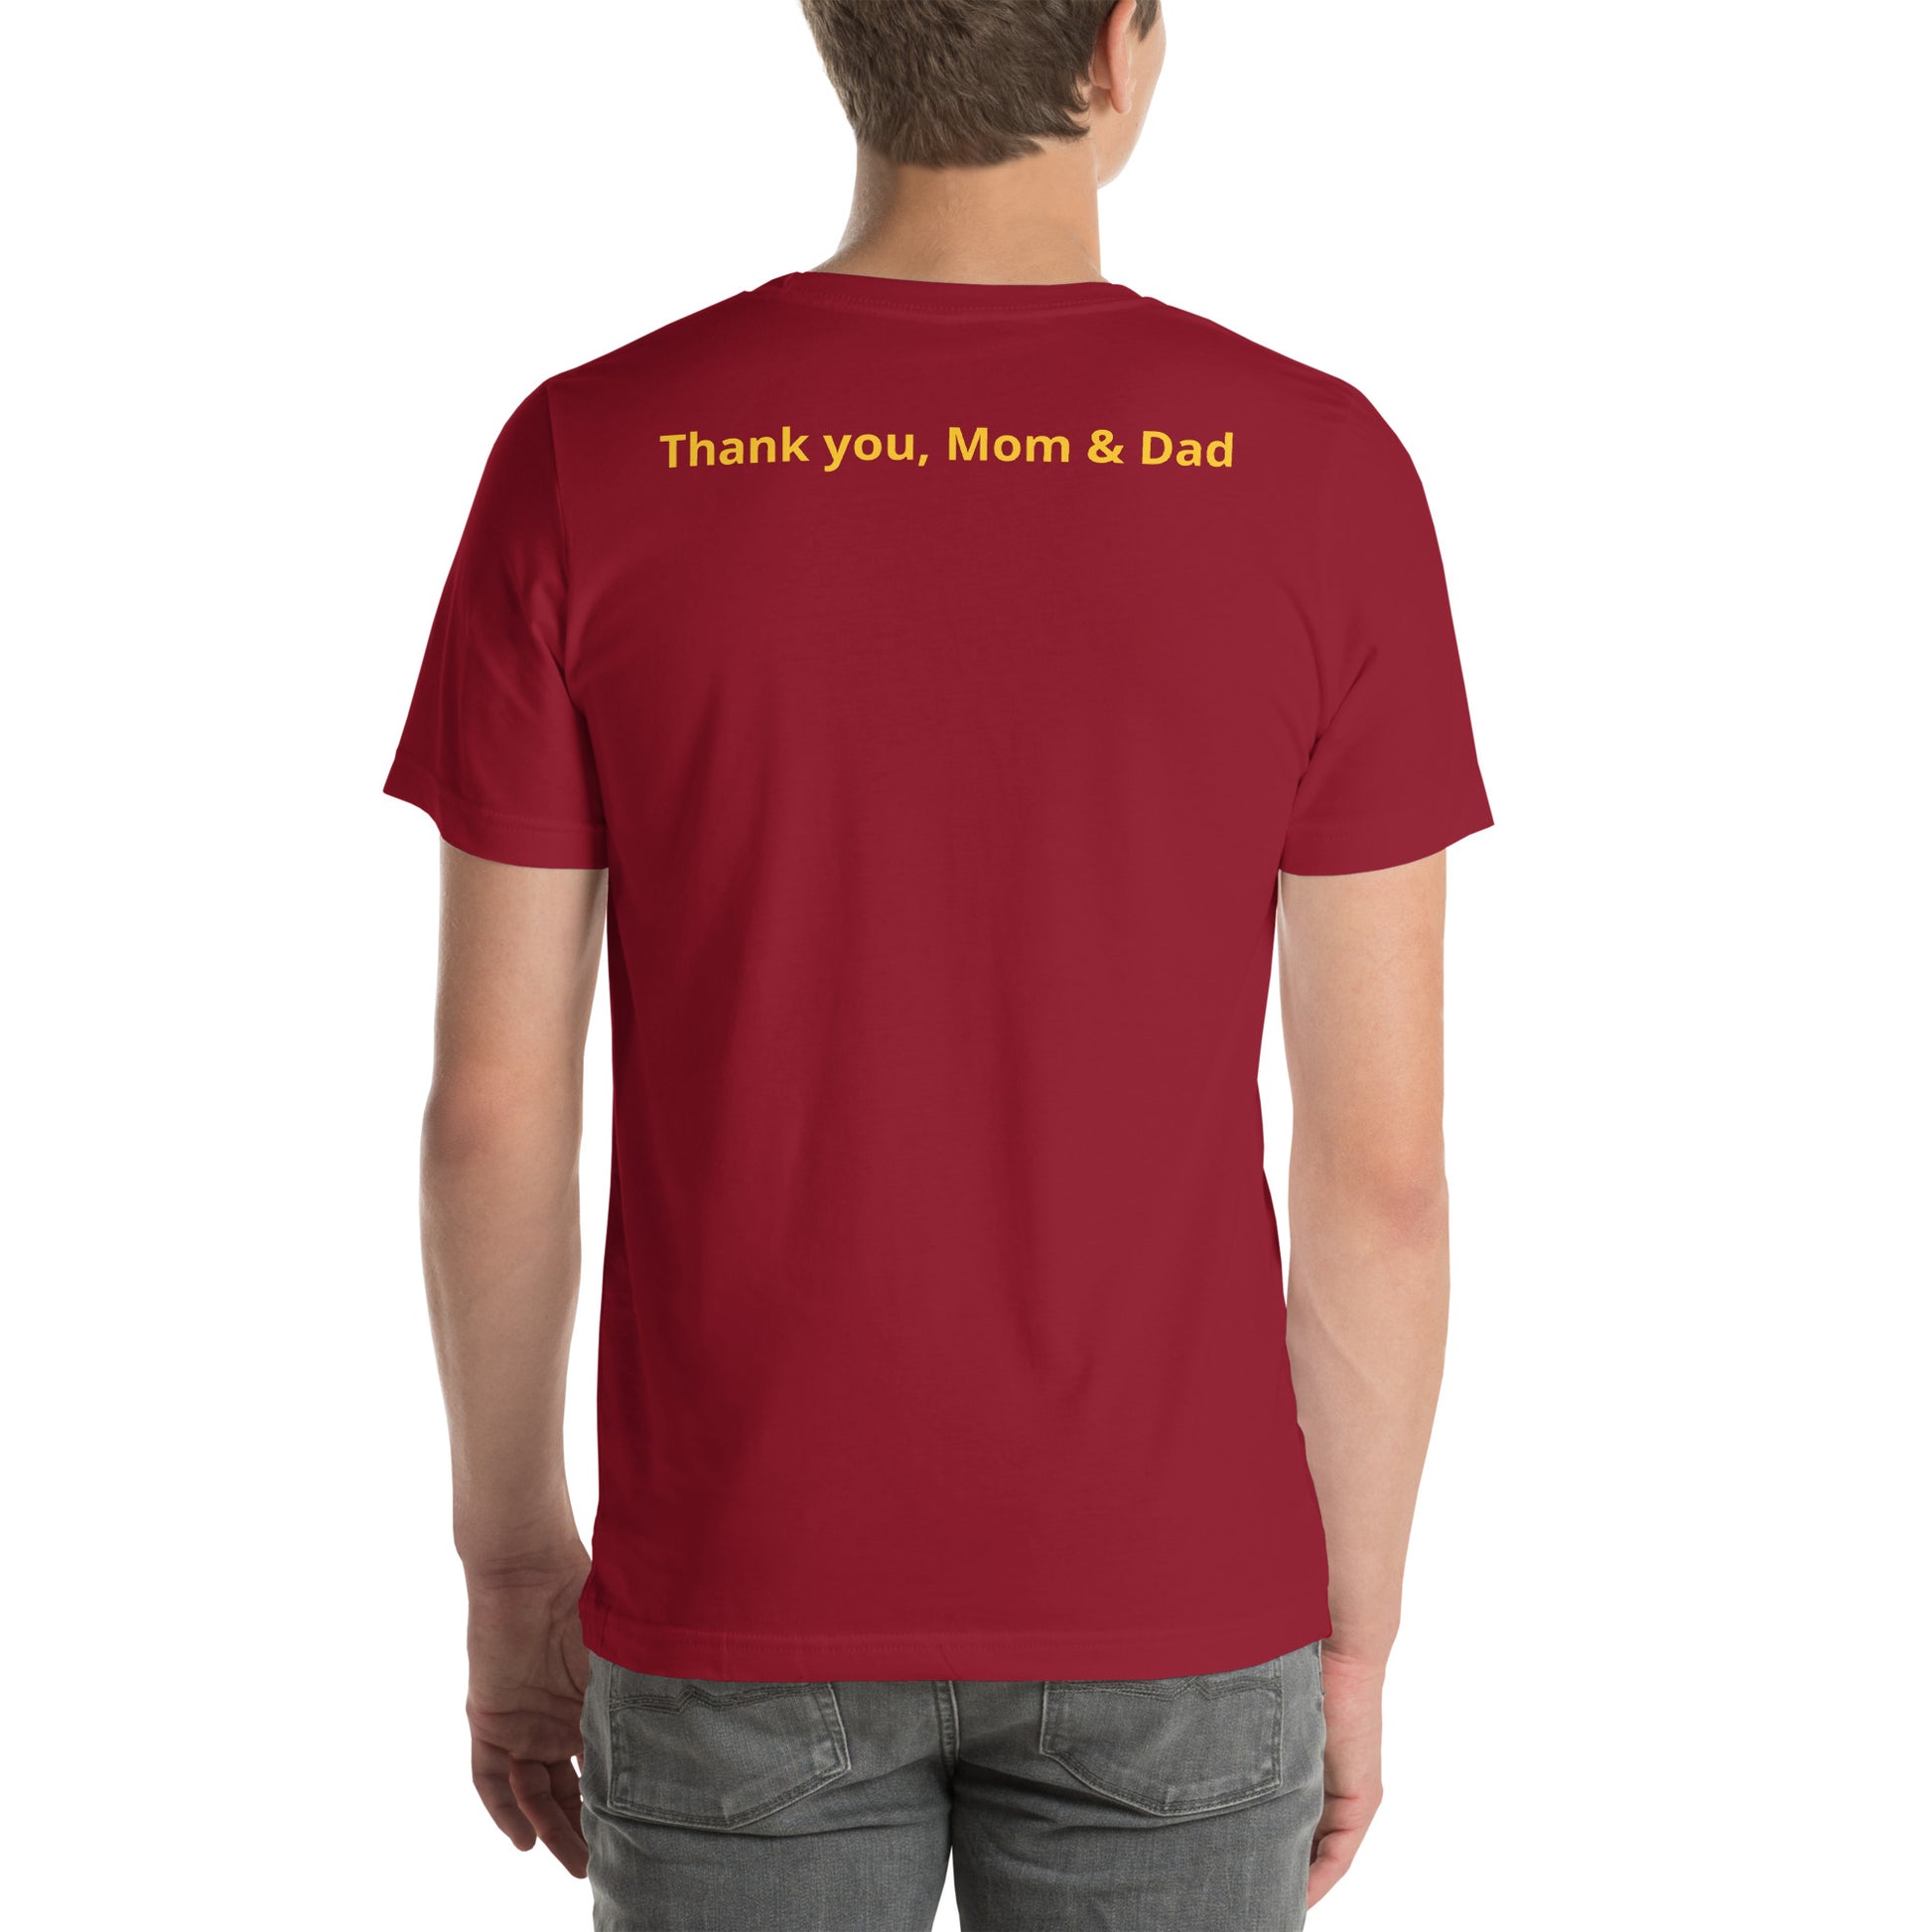 Cardinal red short sleeve tee shirt that says "College '24 Grad" on the front and "Thank you, Mom & Dad" on the back in yellow-gold font